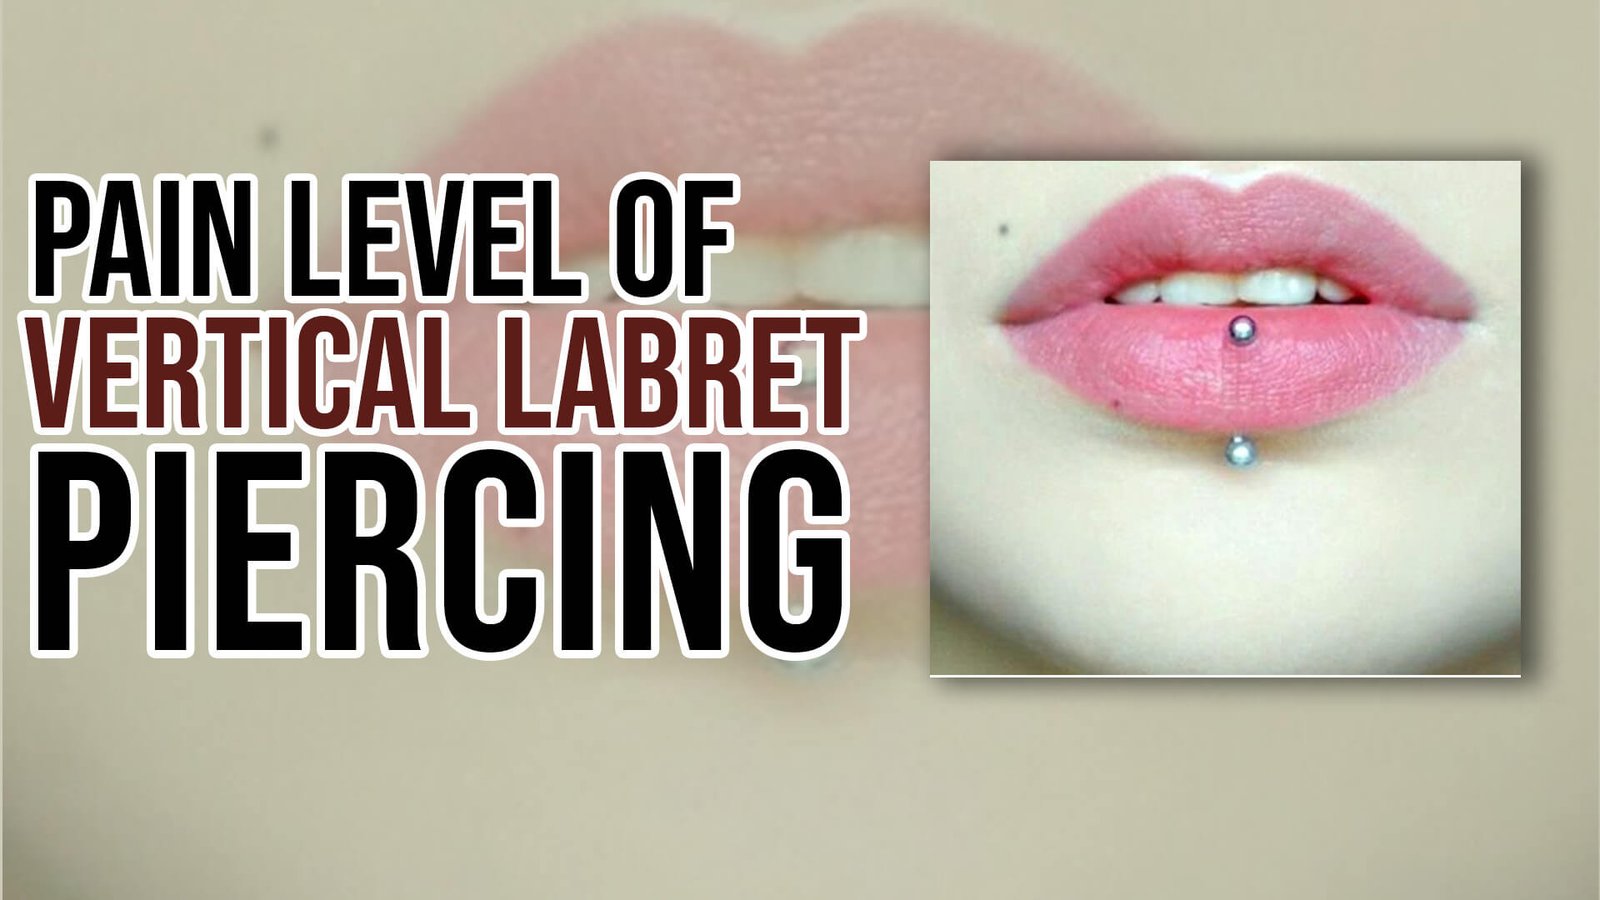 Pain Level of Vertical Labret Piercing